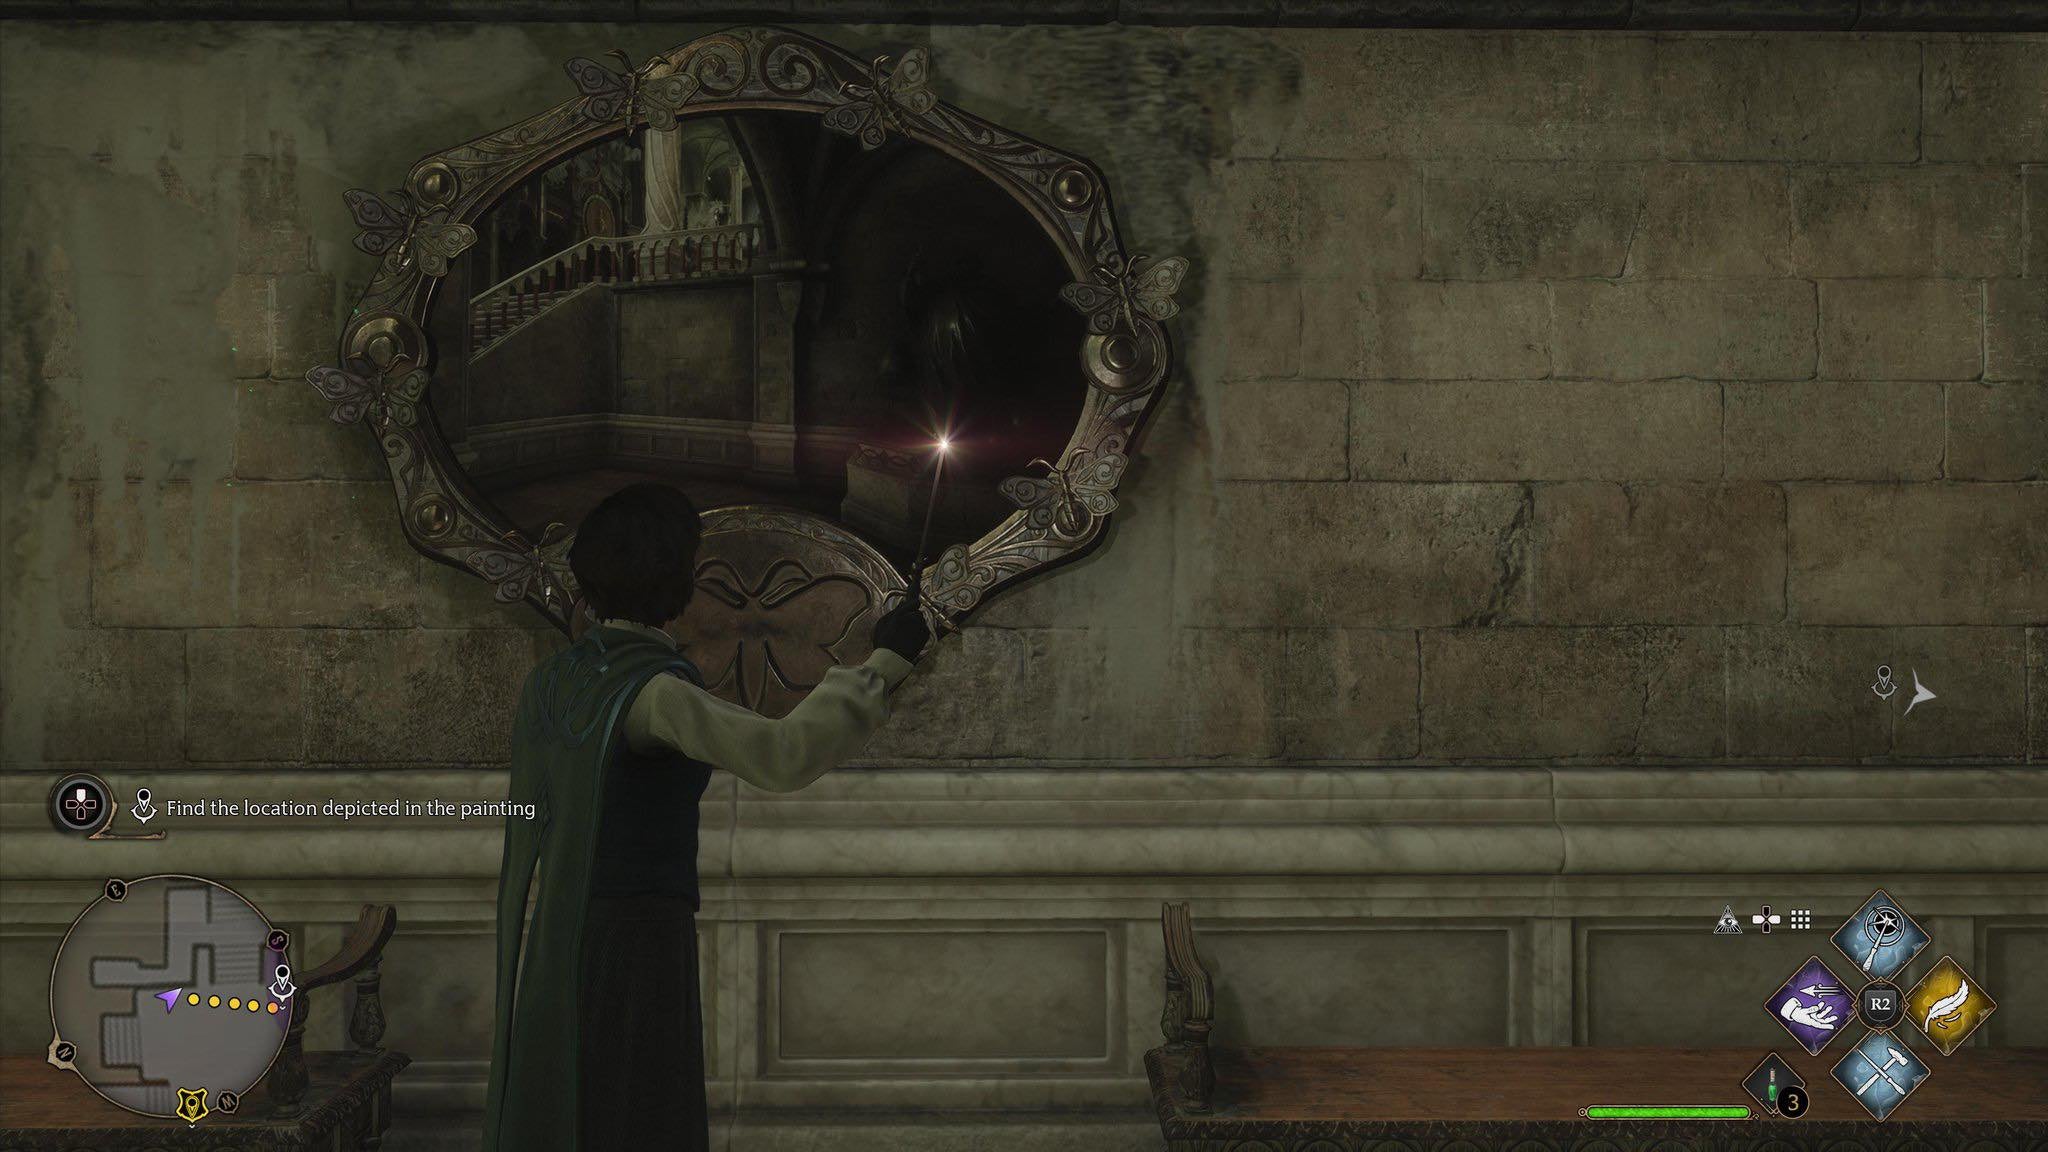 One of the many mirror puzzles in Hogwarts.